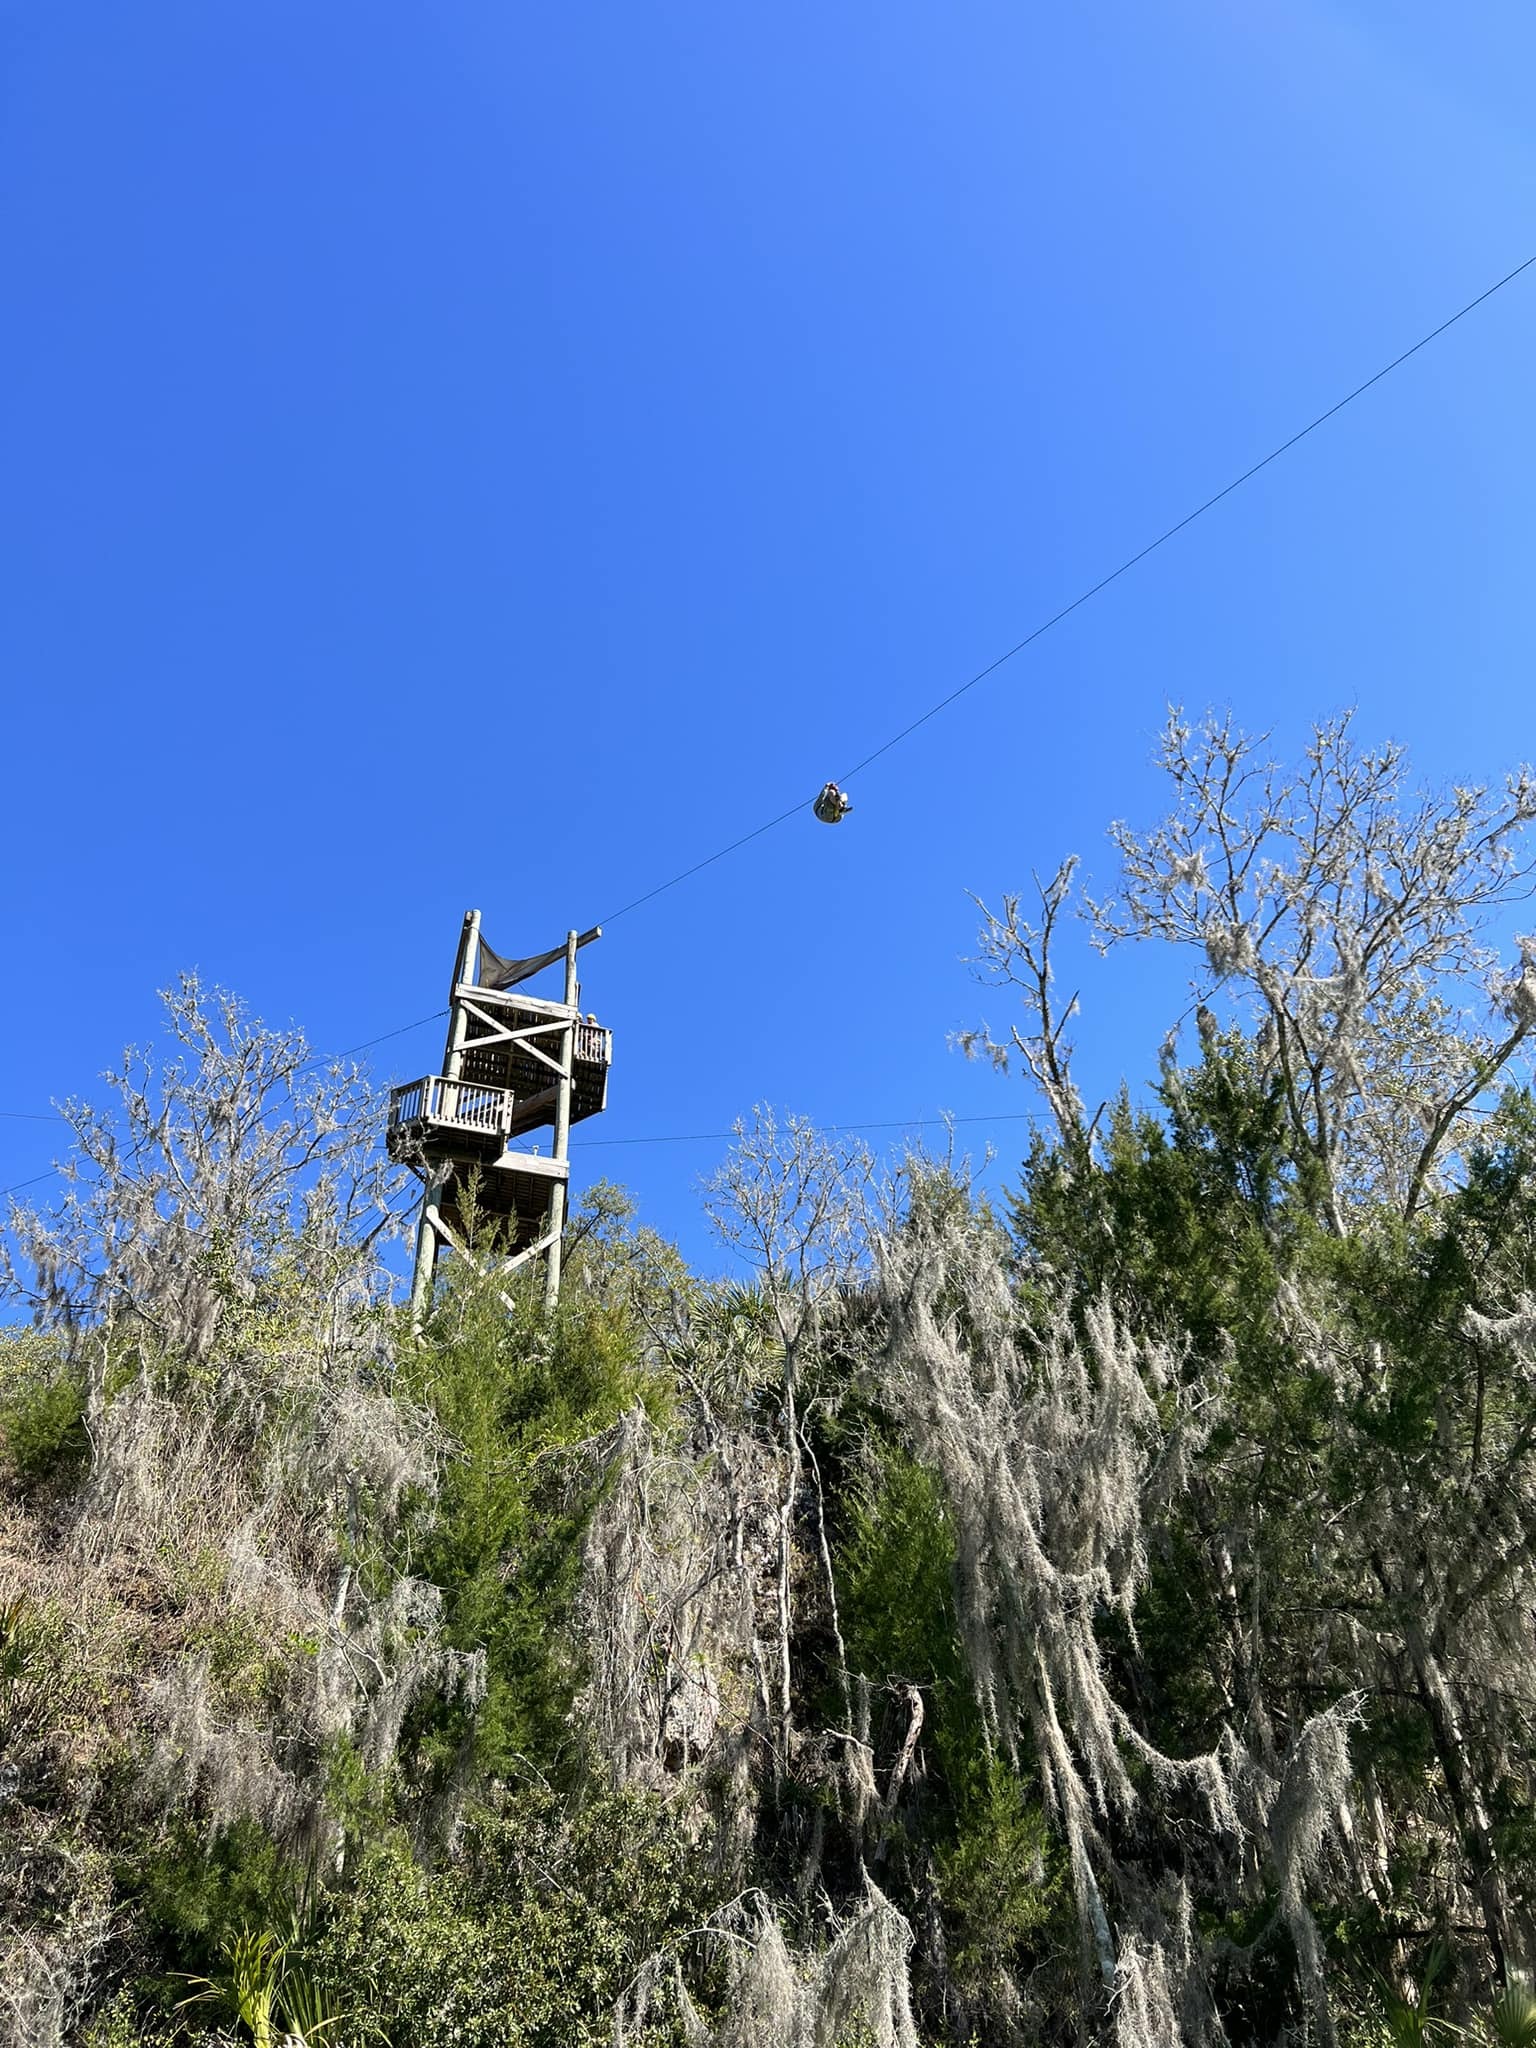 The Cayons Zip Line and Adventure Park